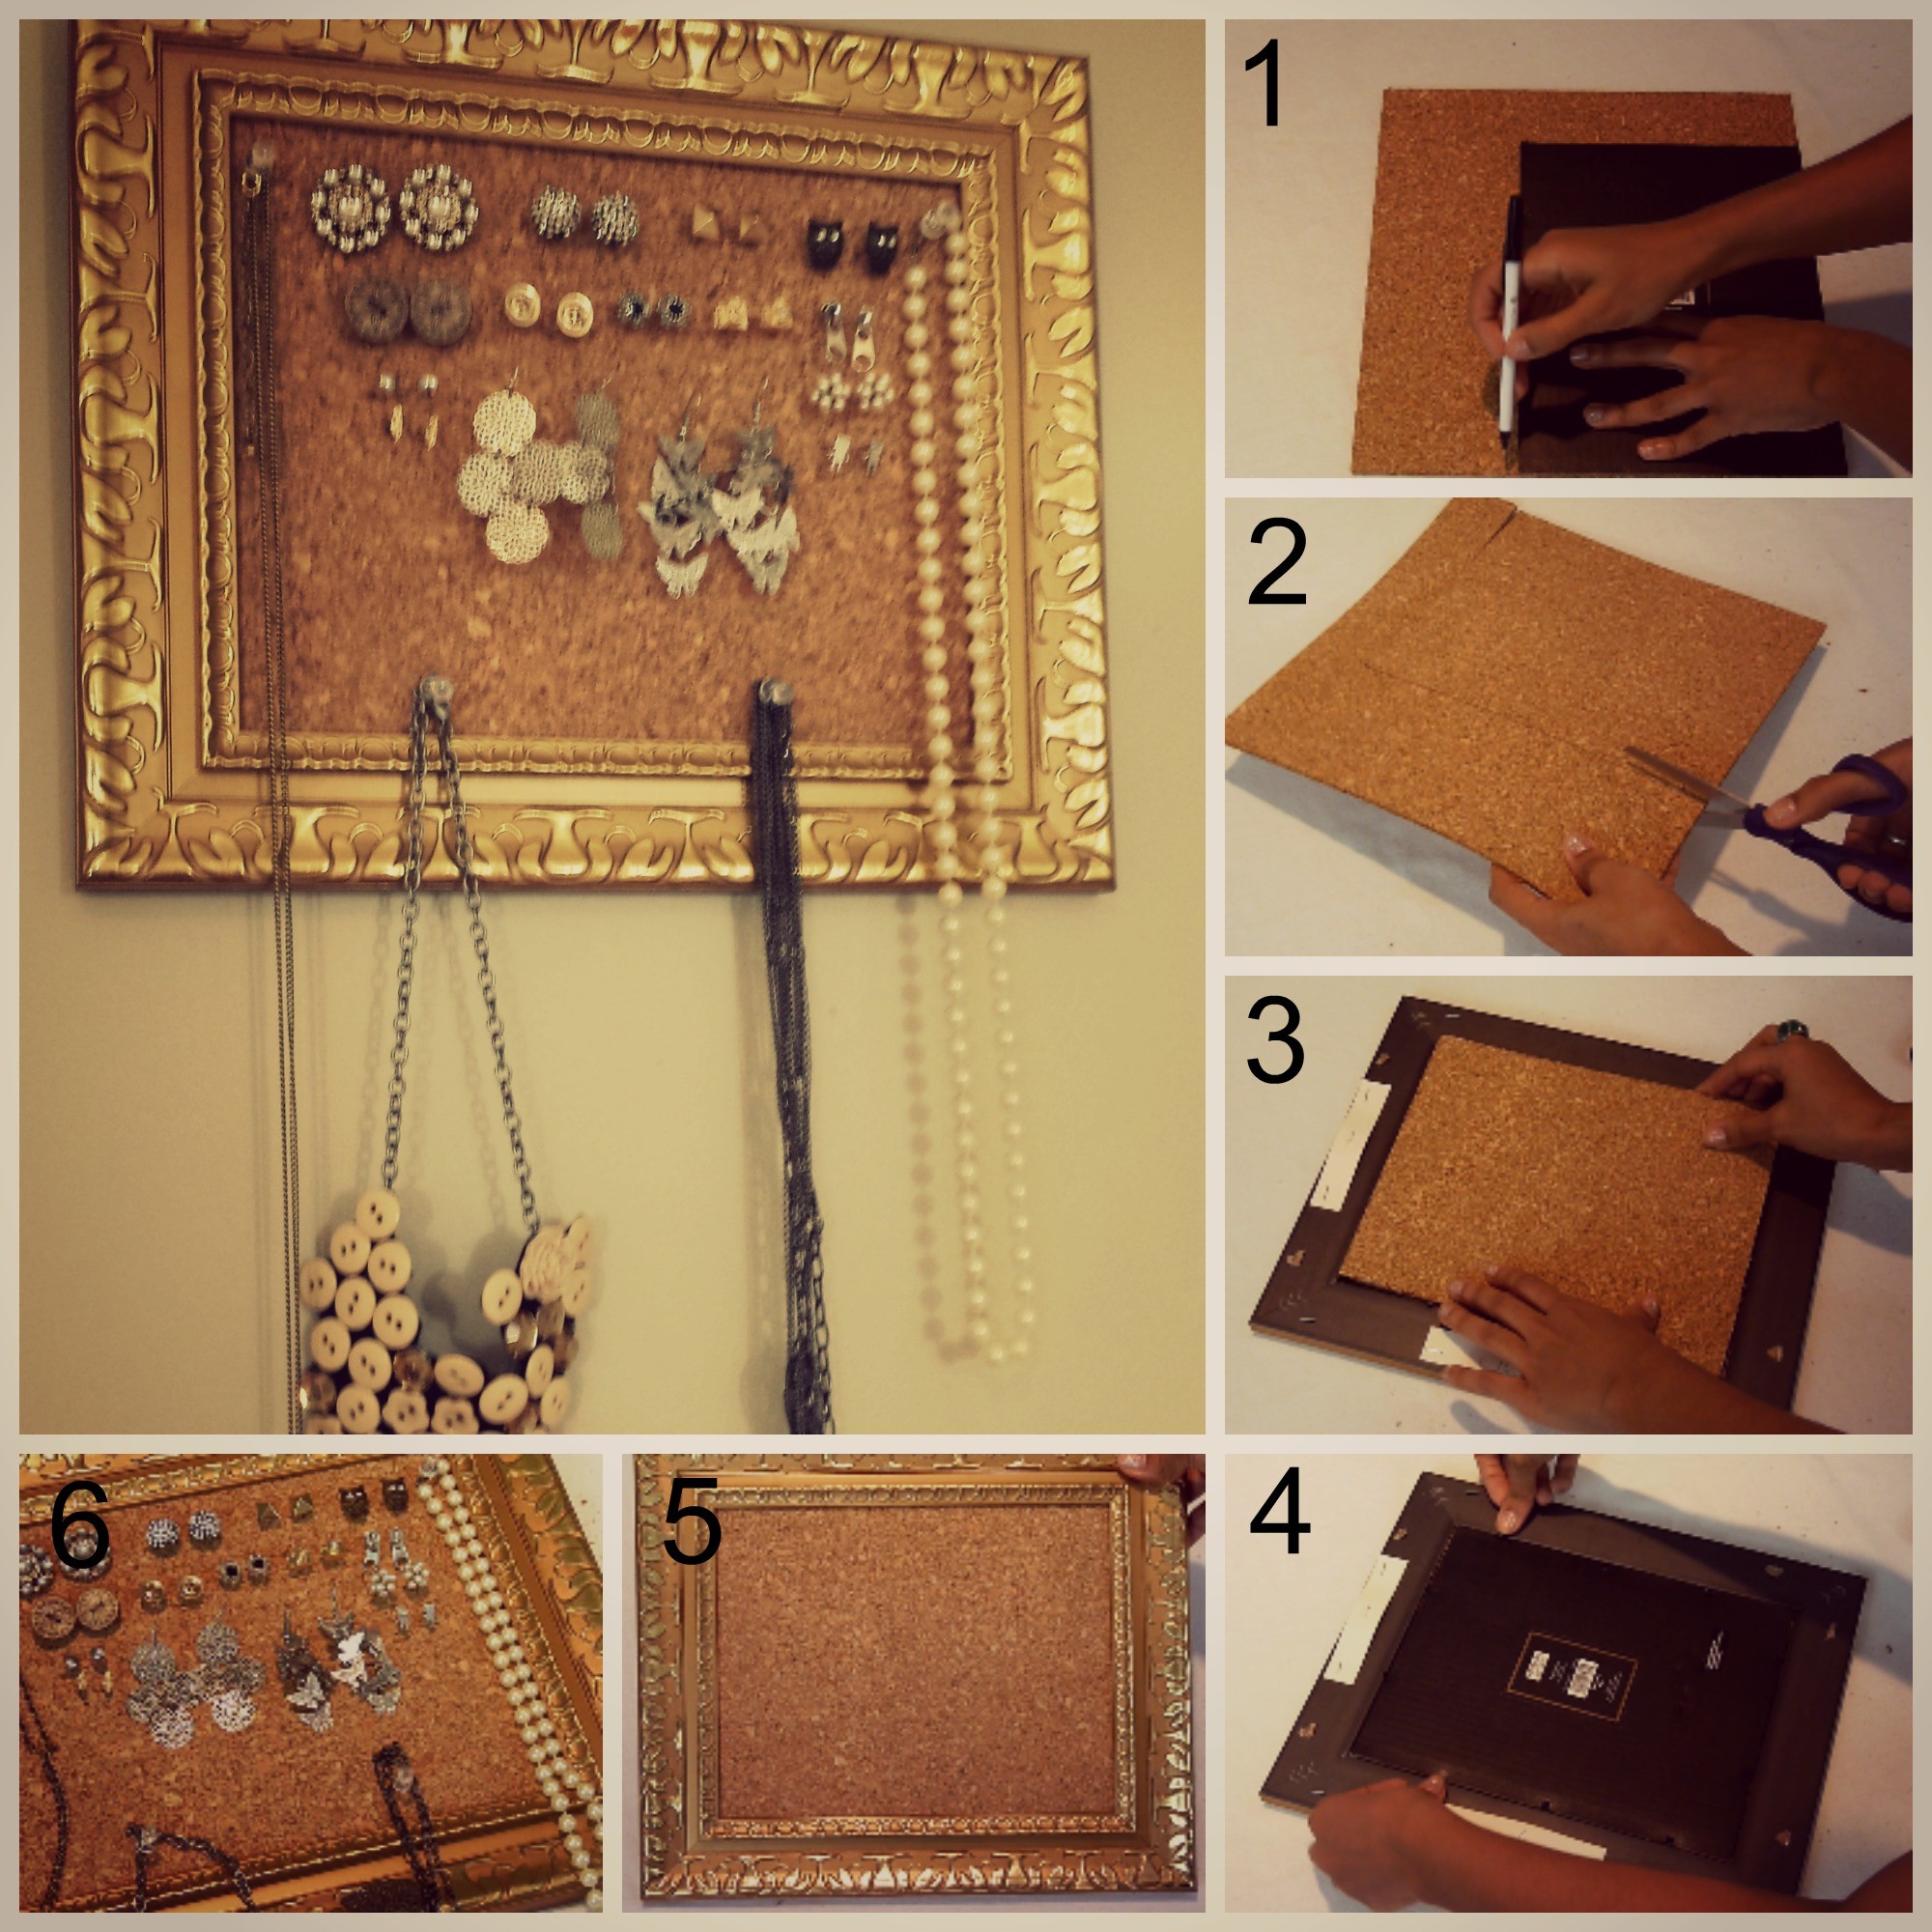 Remarkable How To Make A Cork Board 81 On Home Design Pictures with How To  Make A Cork Board